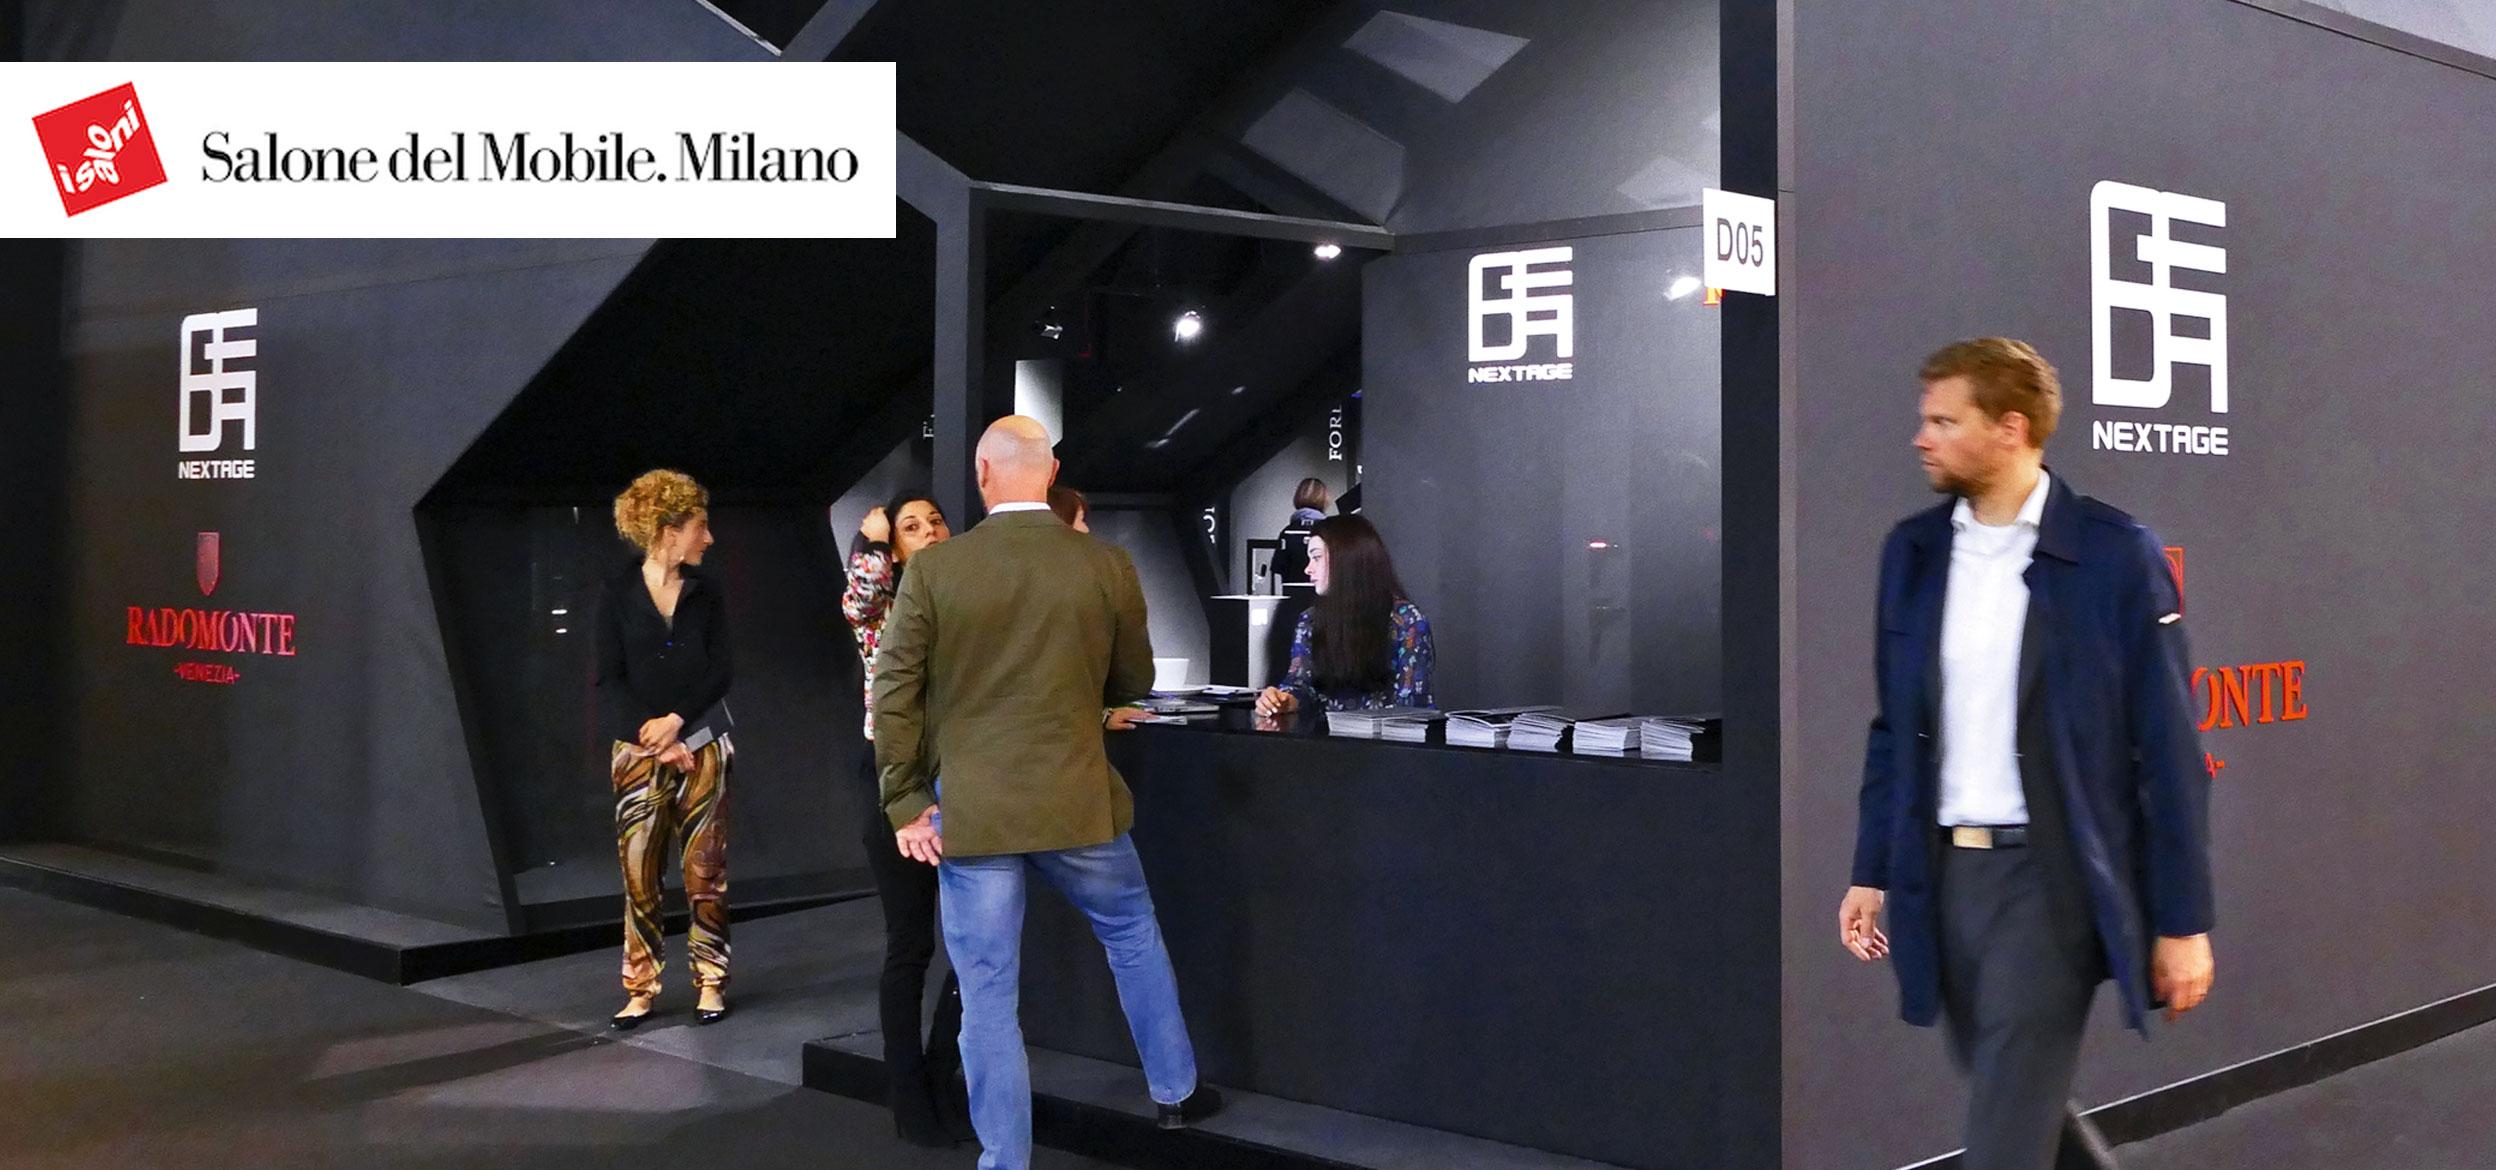 RADOMONTE at Salone del Mobile 2016. Thanks to you… it’s been a huge success!